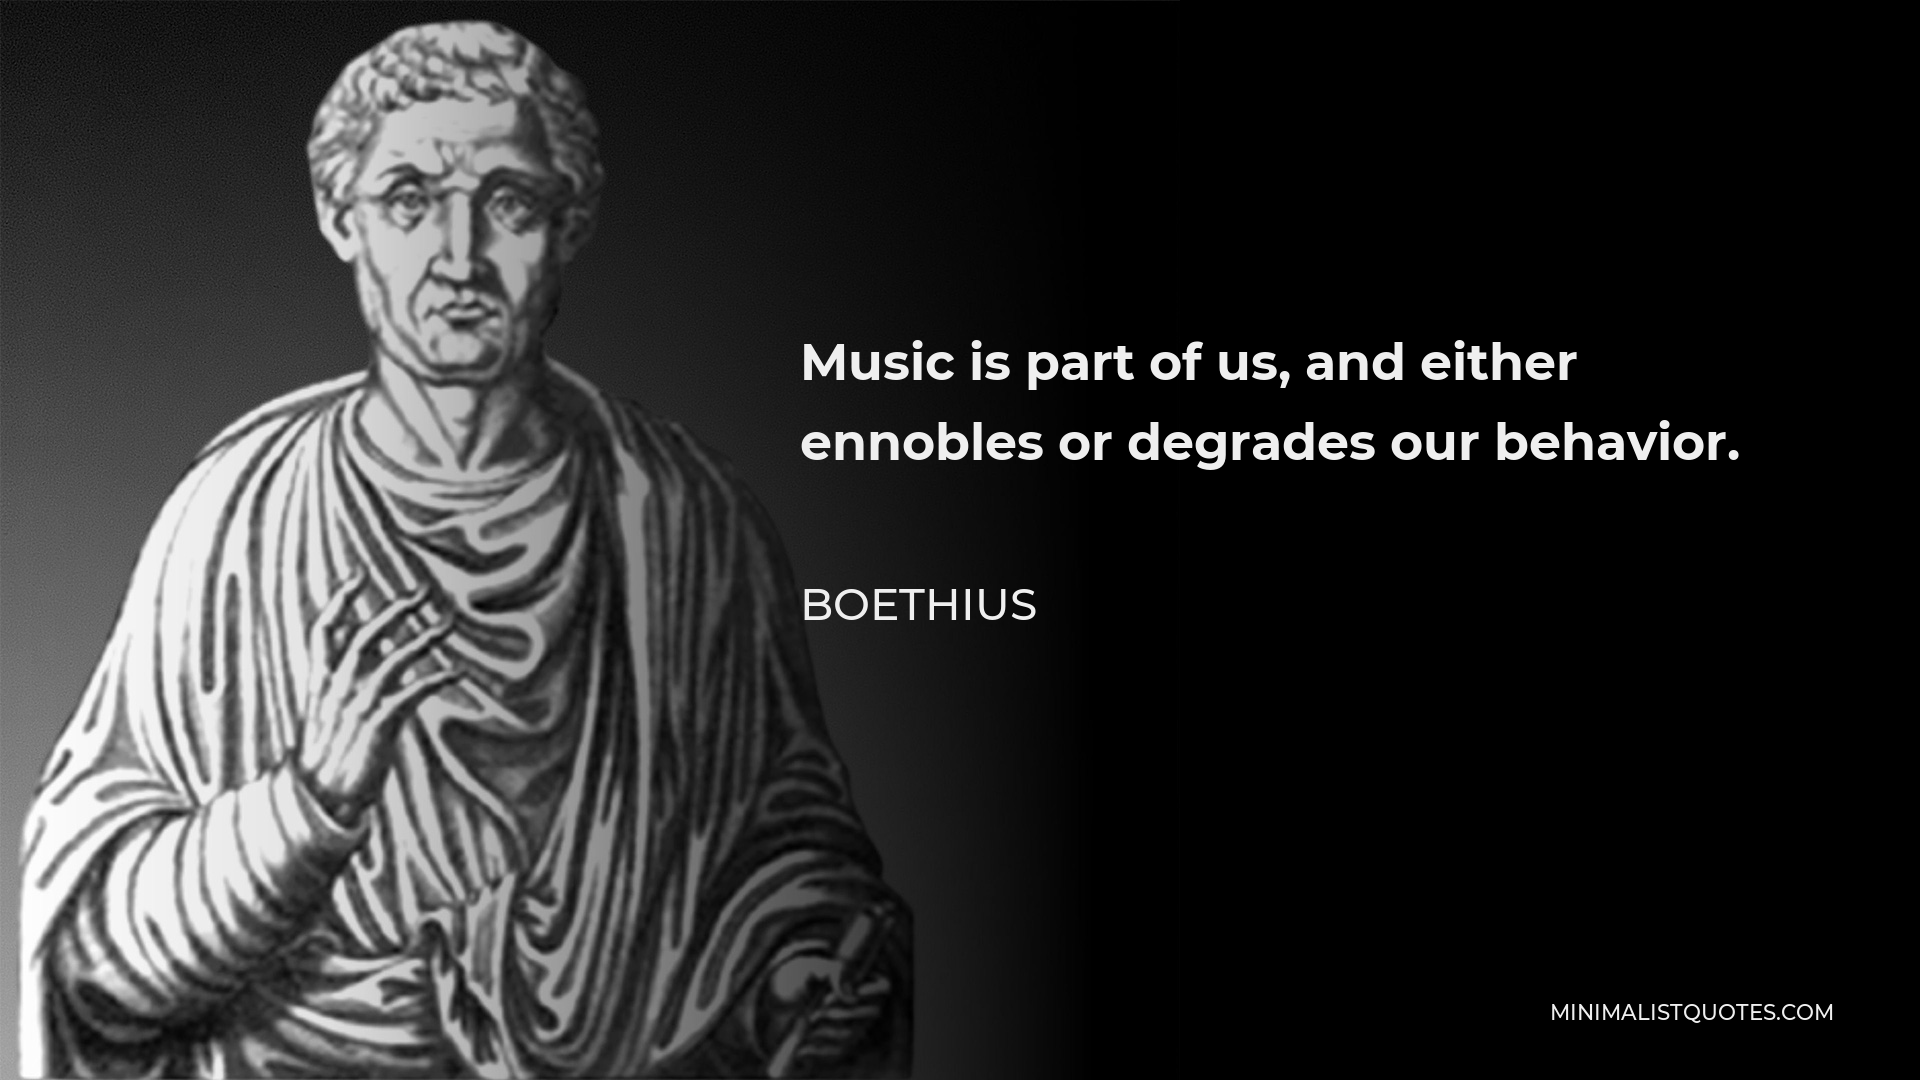 Boethius Quote - Music is part of us, and either ennobles or degrades our behavior.